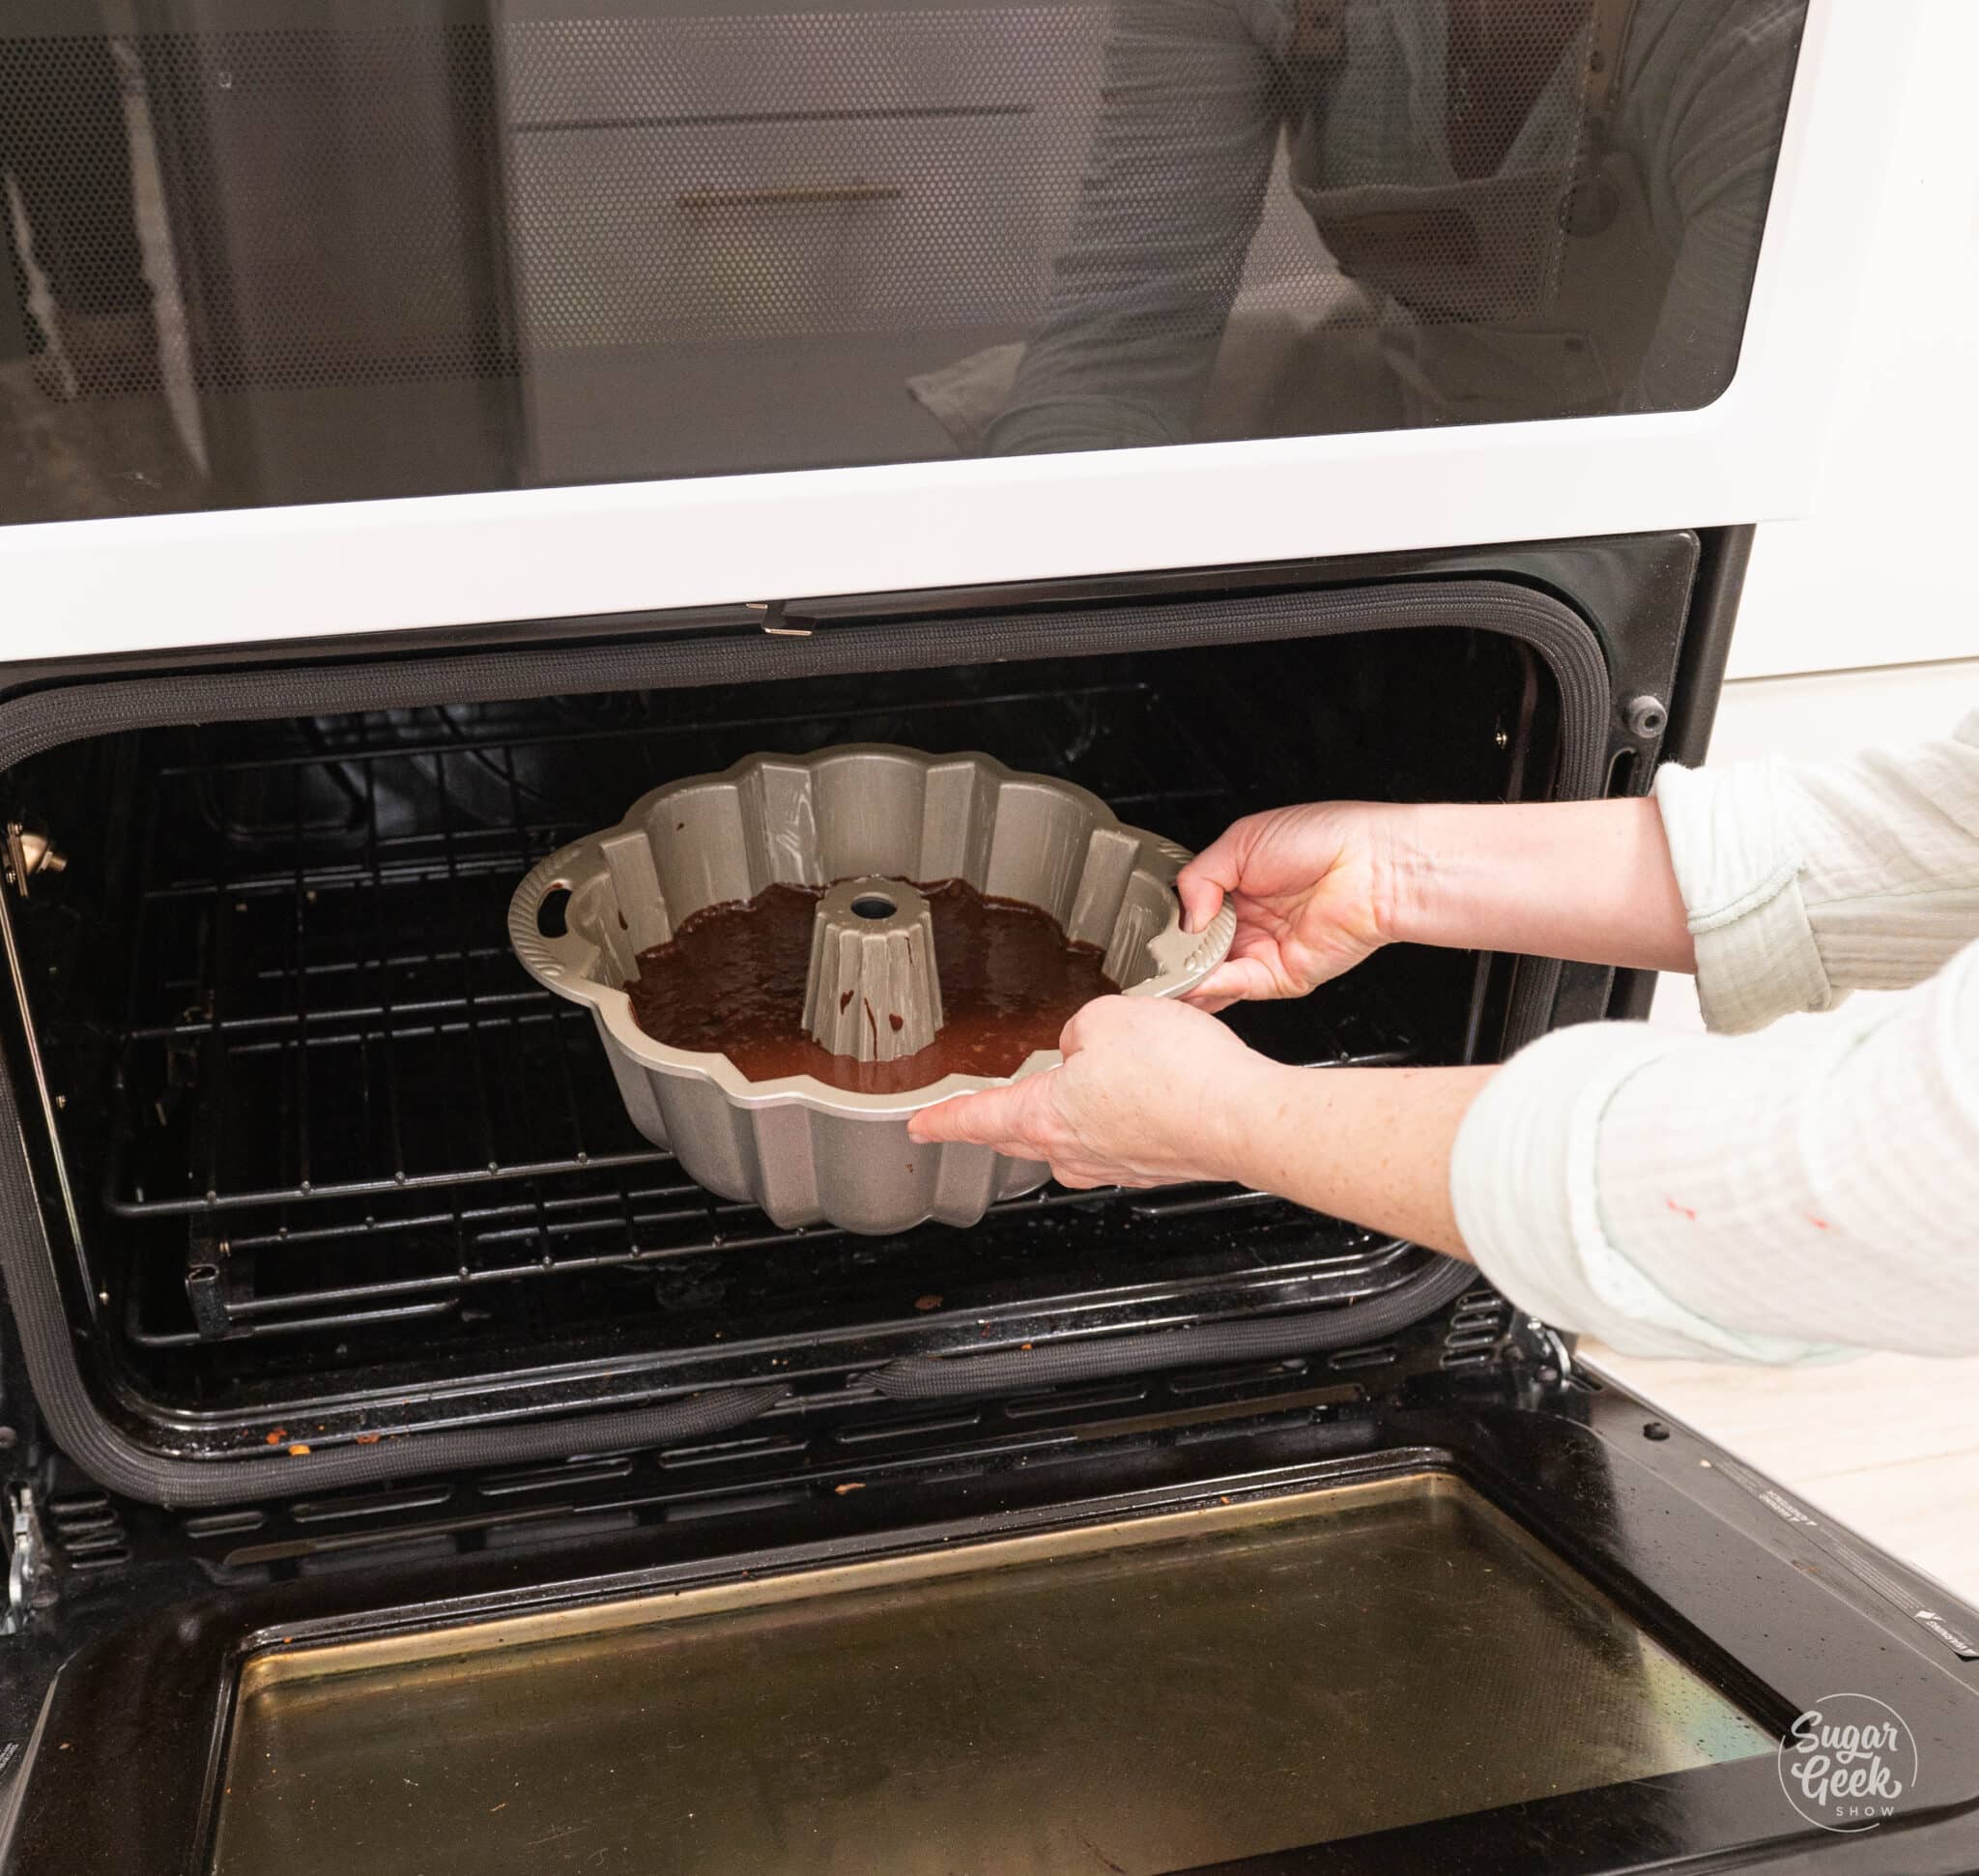 hands placing a bundt pan with chocolate batter into an oven